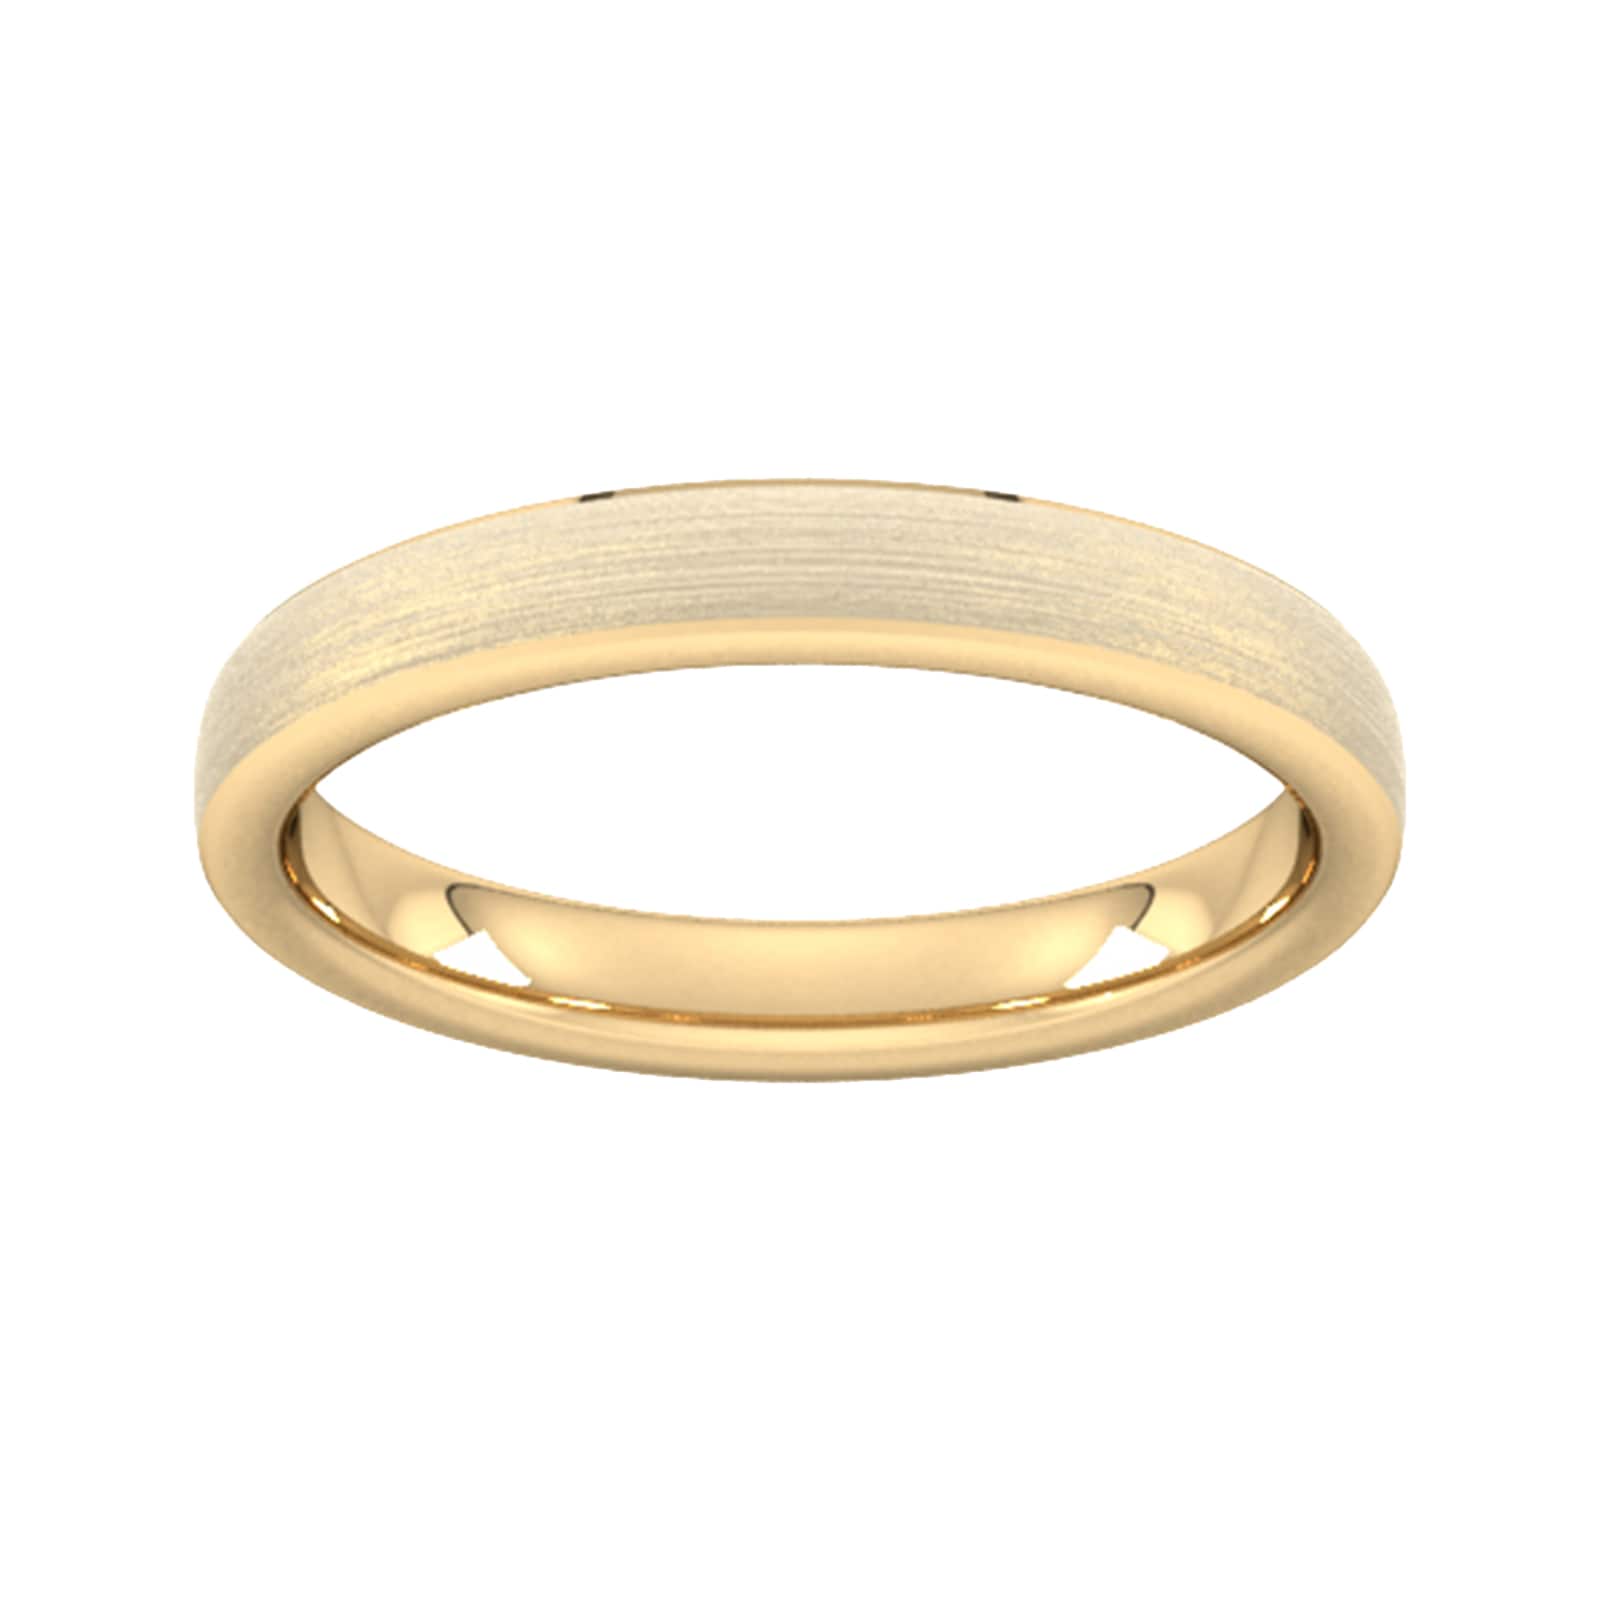 3mm Slight Court Heavy Polished Chamfered Edges With Matt Centre Wedding Ring In 18 Carat Yellow Gold - Ring Size L